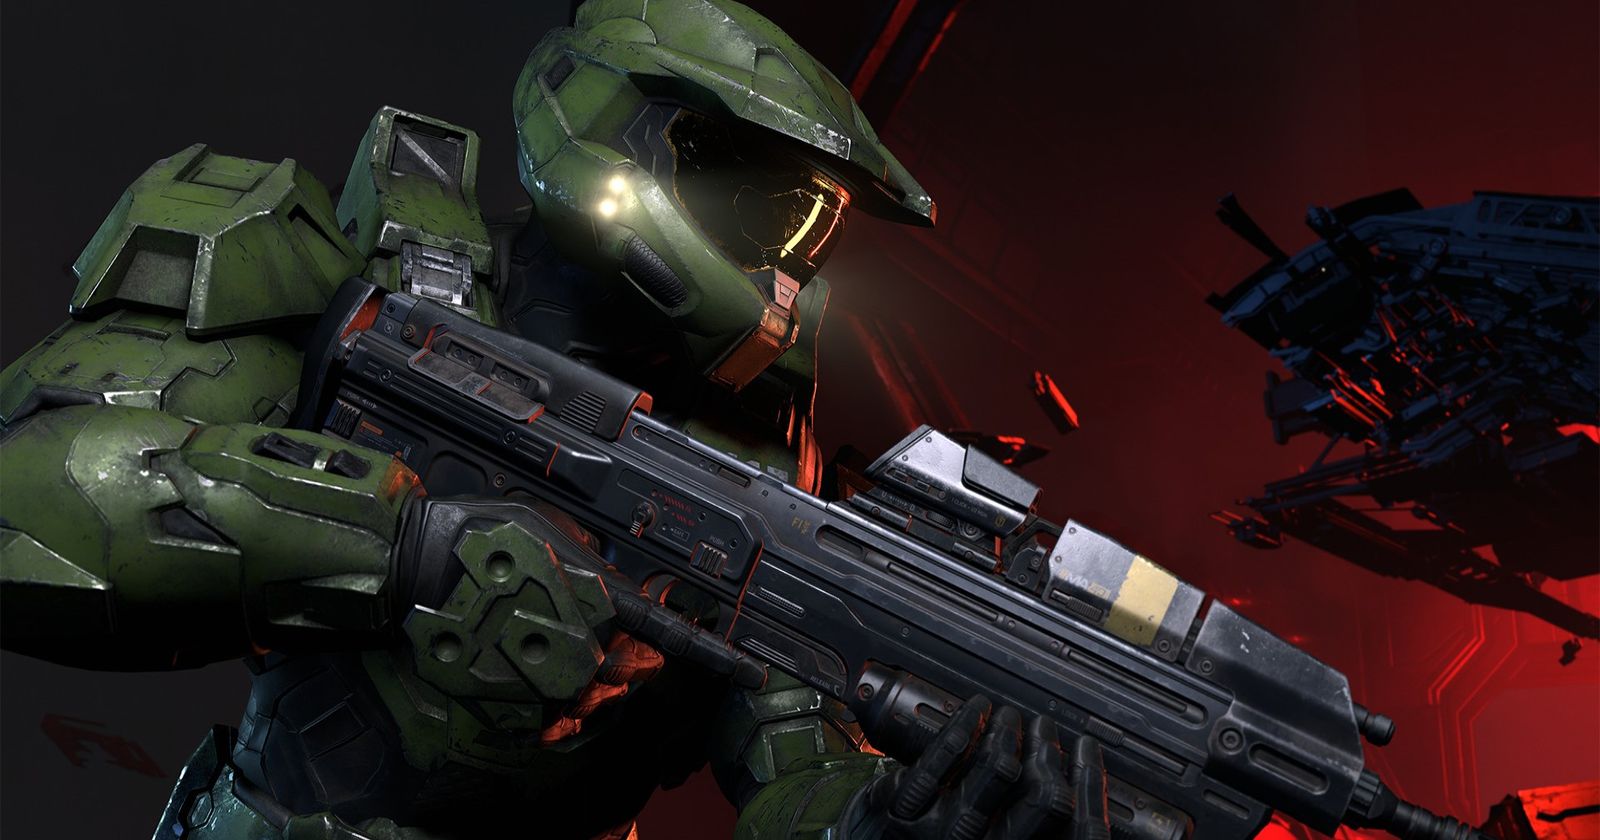 Every Mainline Halo Game Ranked - Game Informer